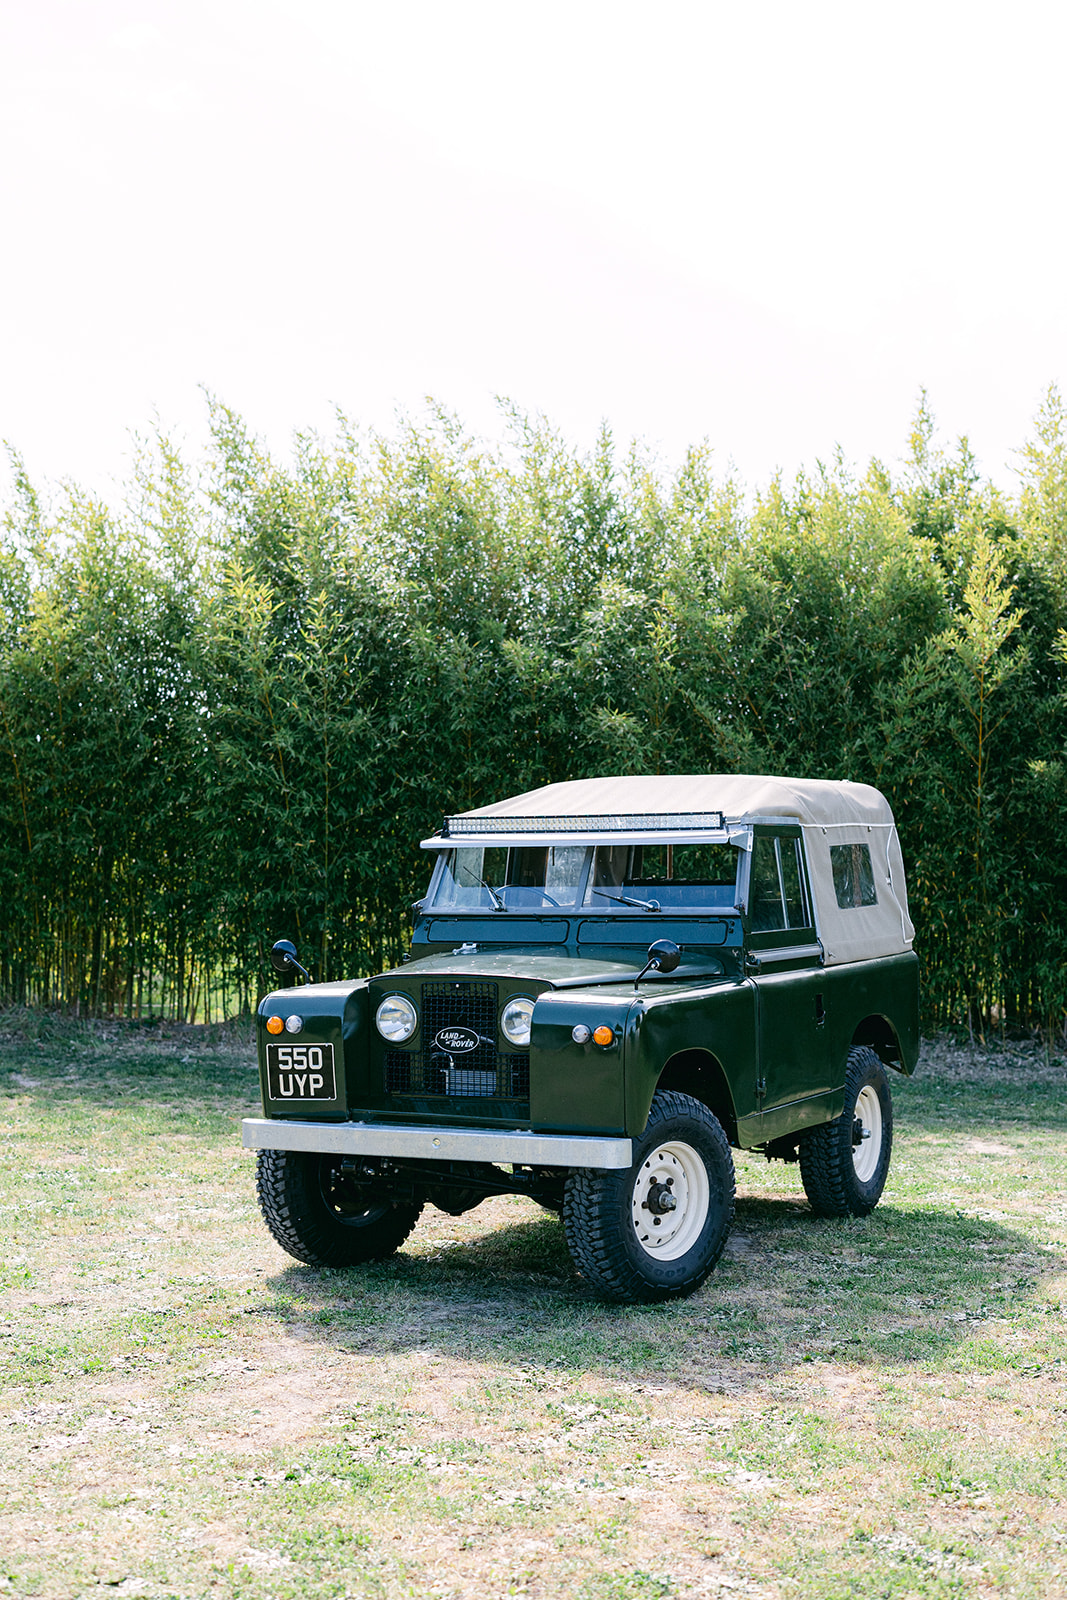 A view of the Provence Classics Land Rover Series 2